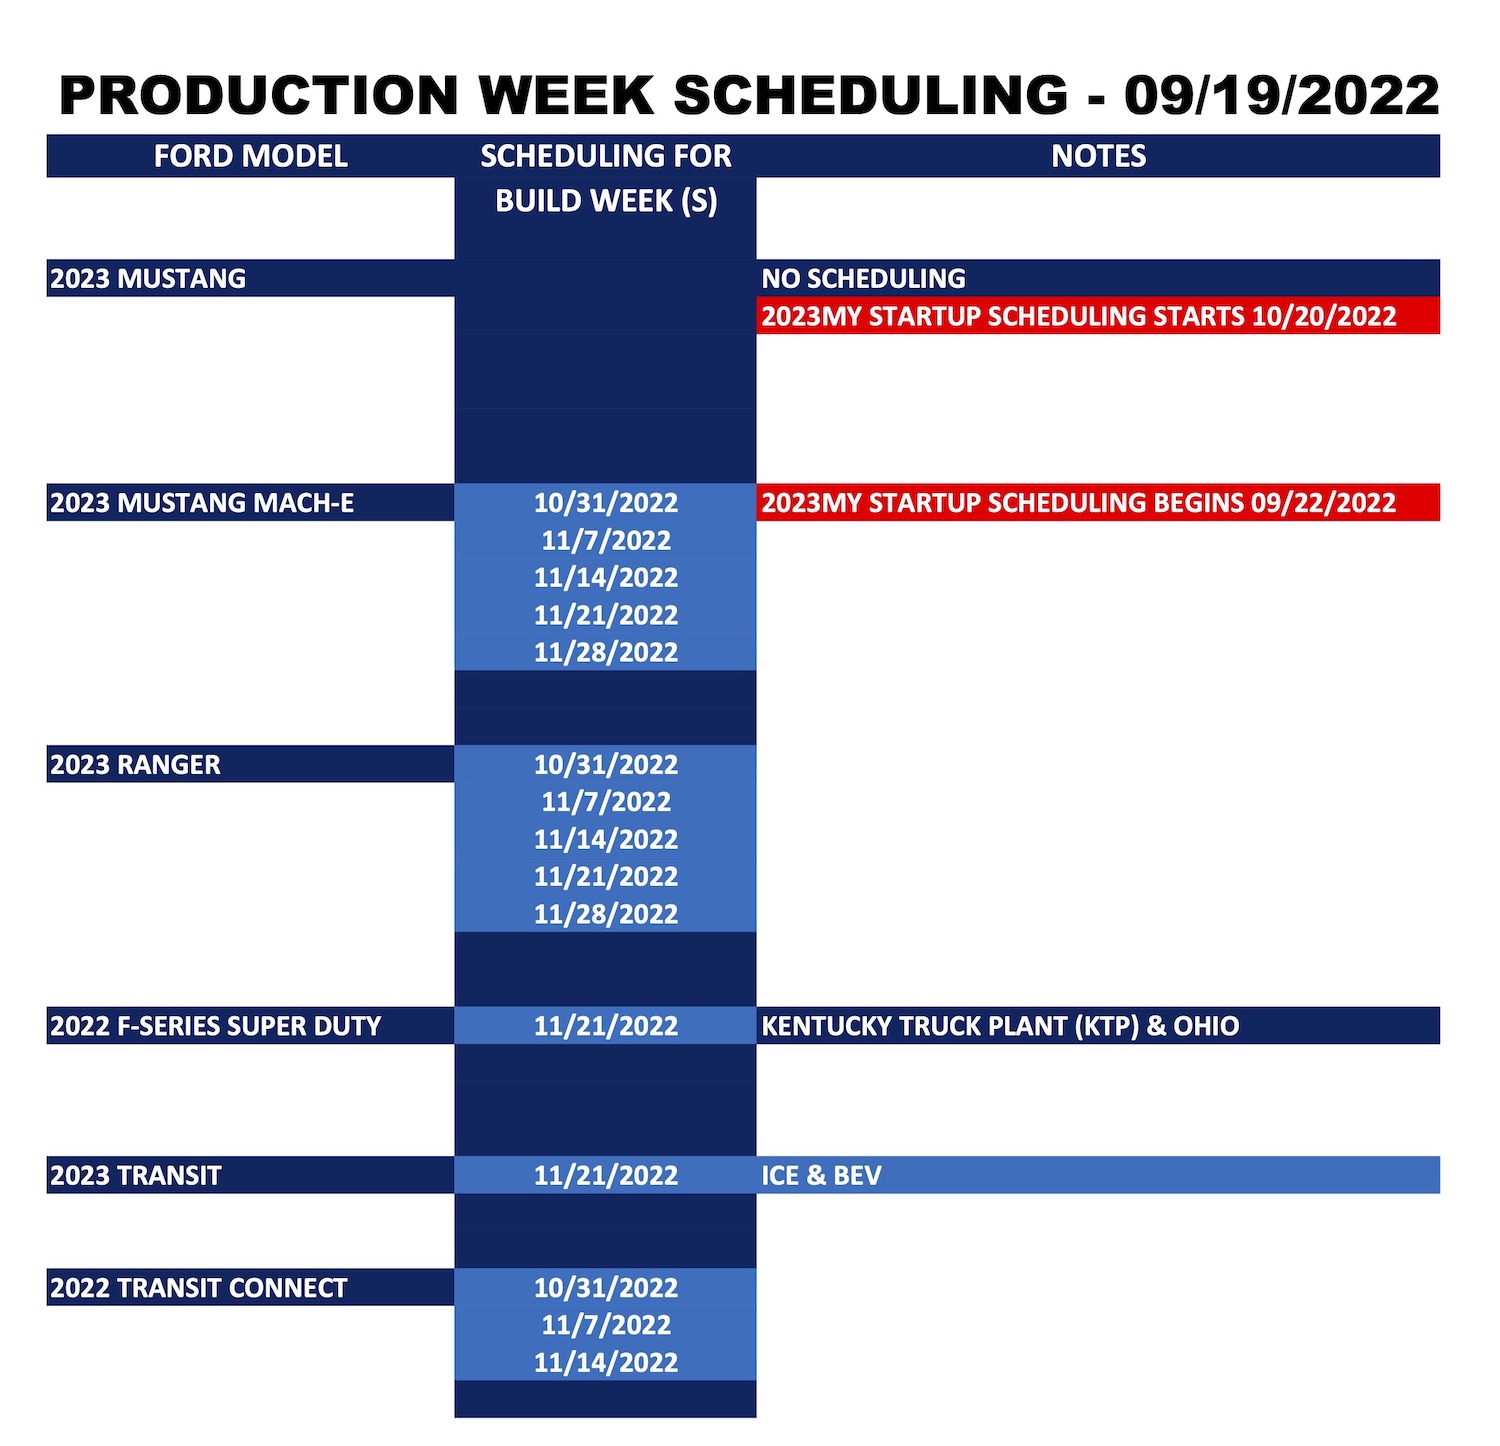 Ford_Forums_Production Week Scheduling_2022-09-19_2.jpg